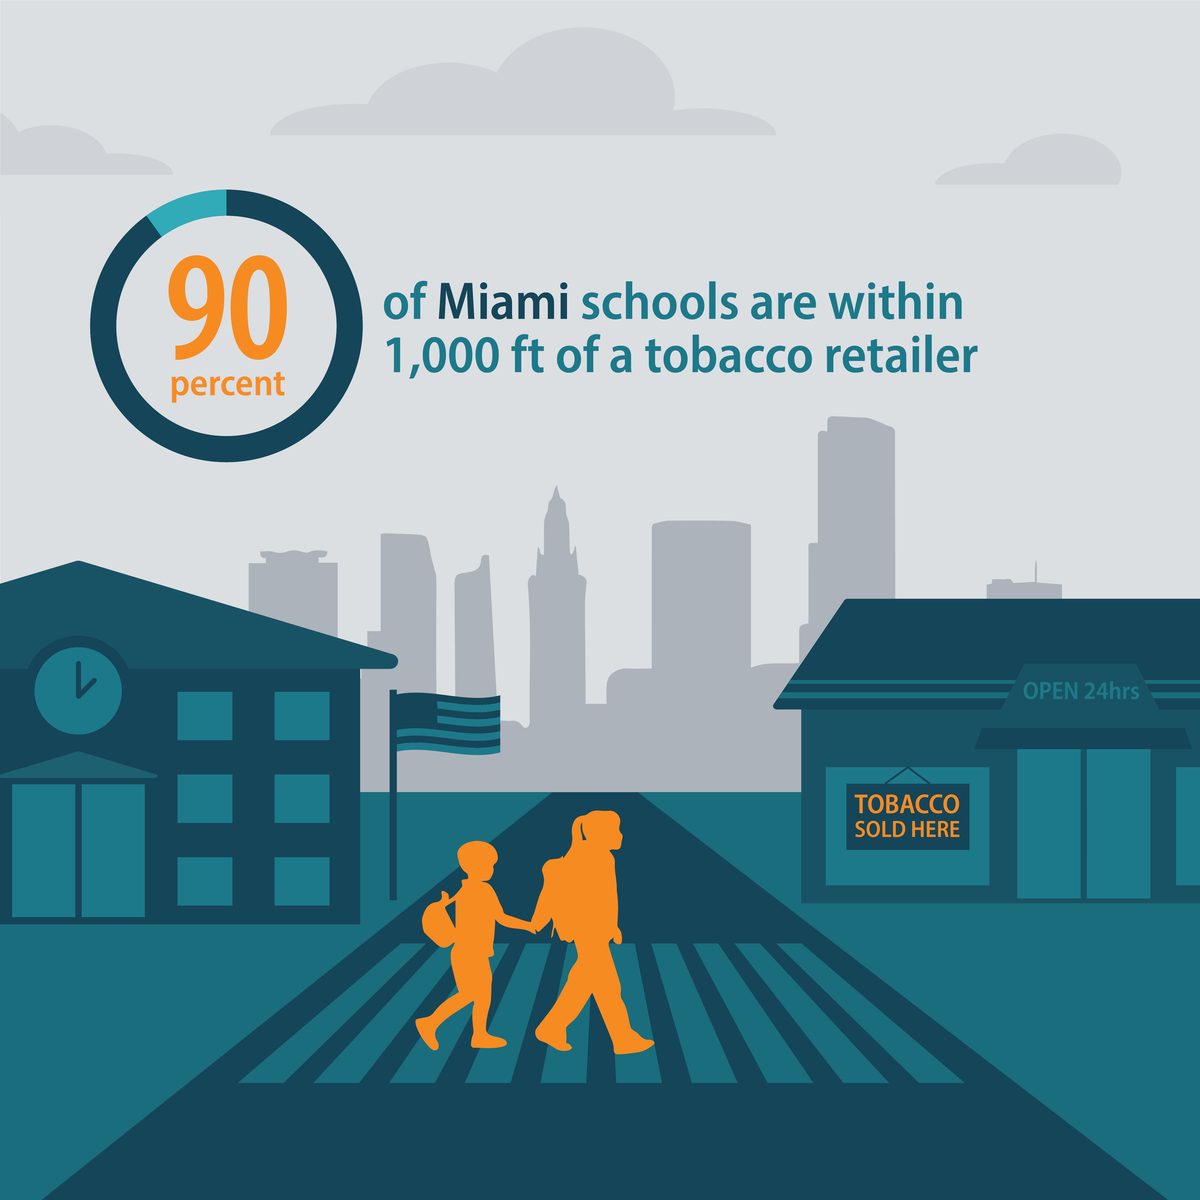 90 percent of Miami schools are within 1,000 feet of a tobacco retailer